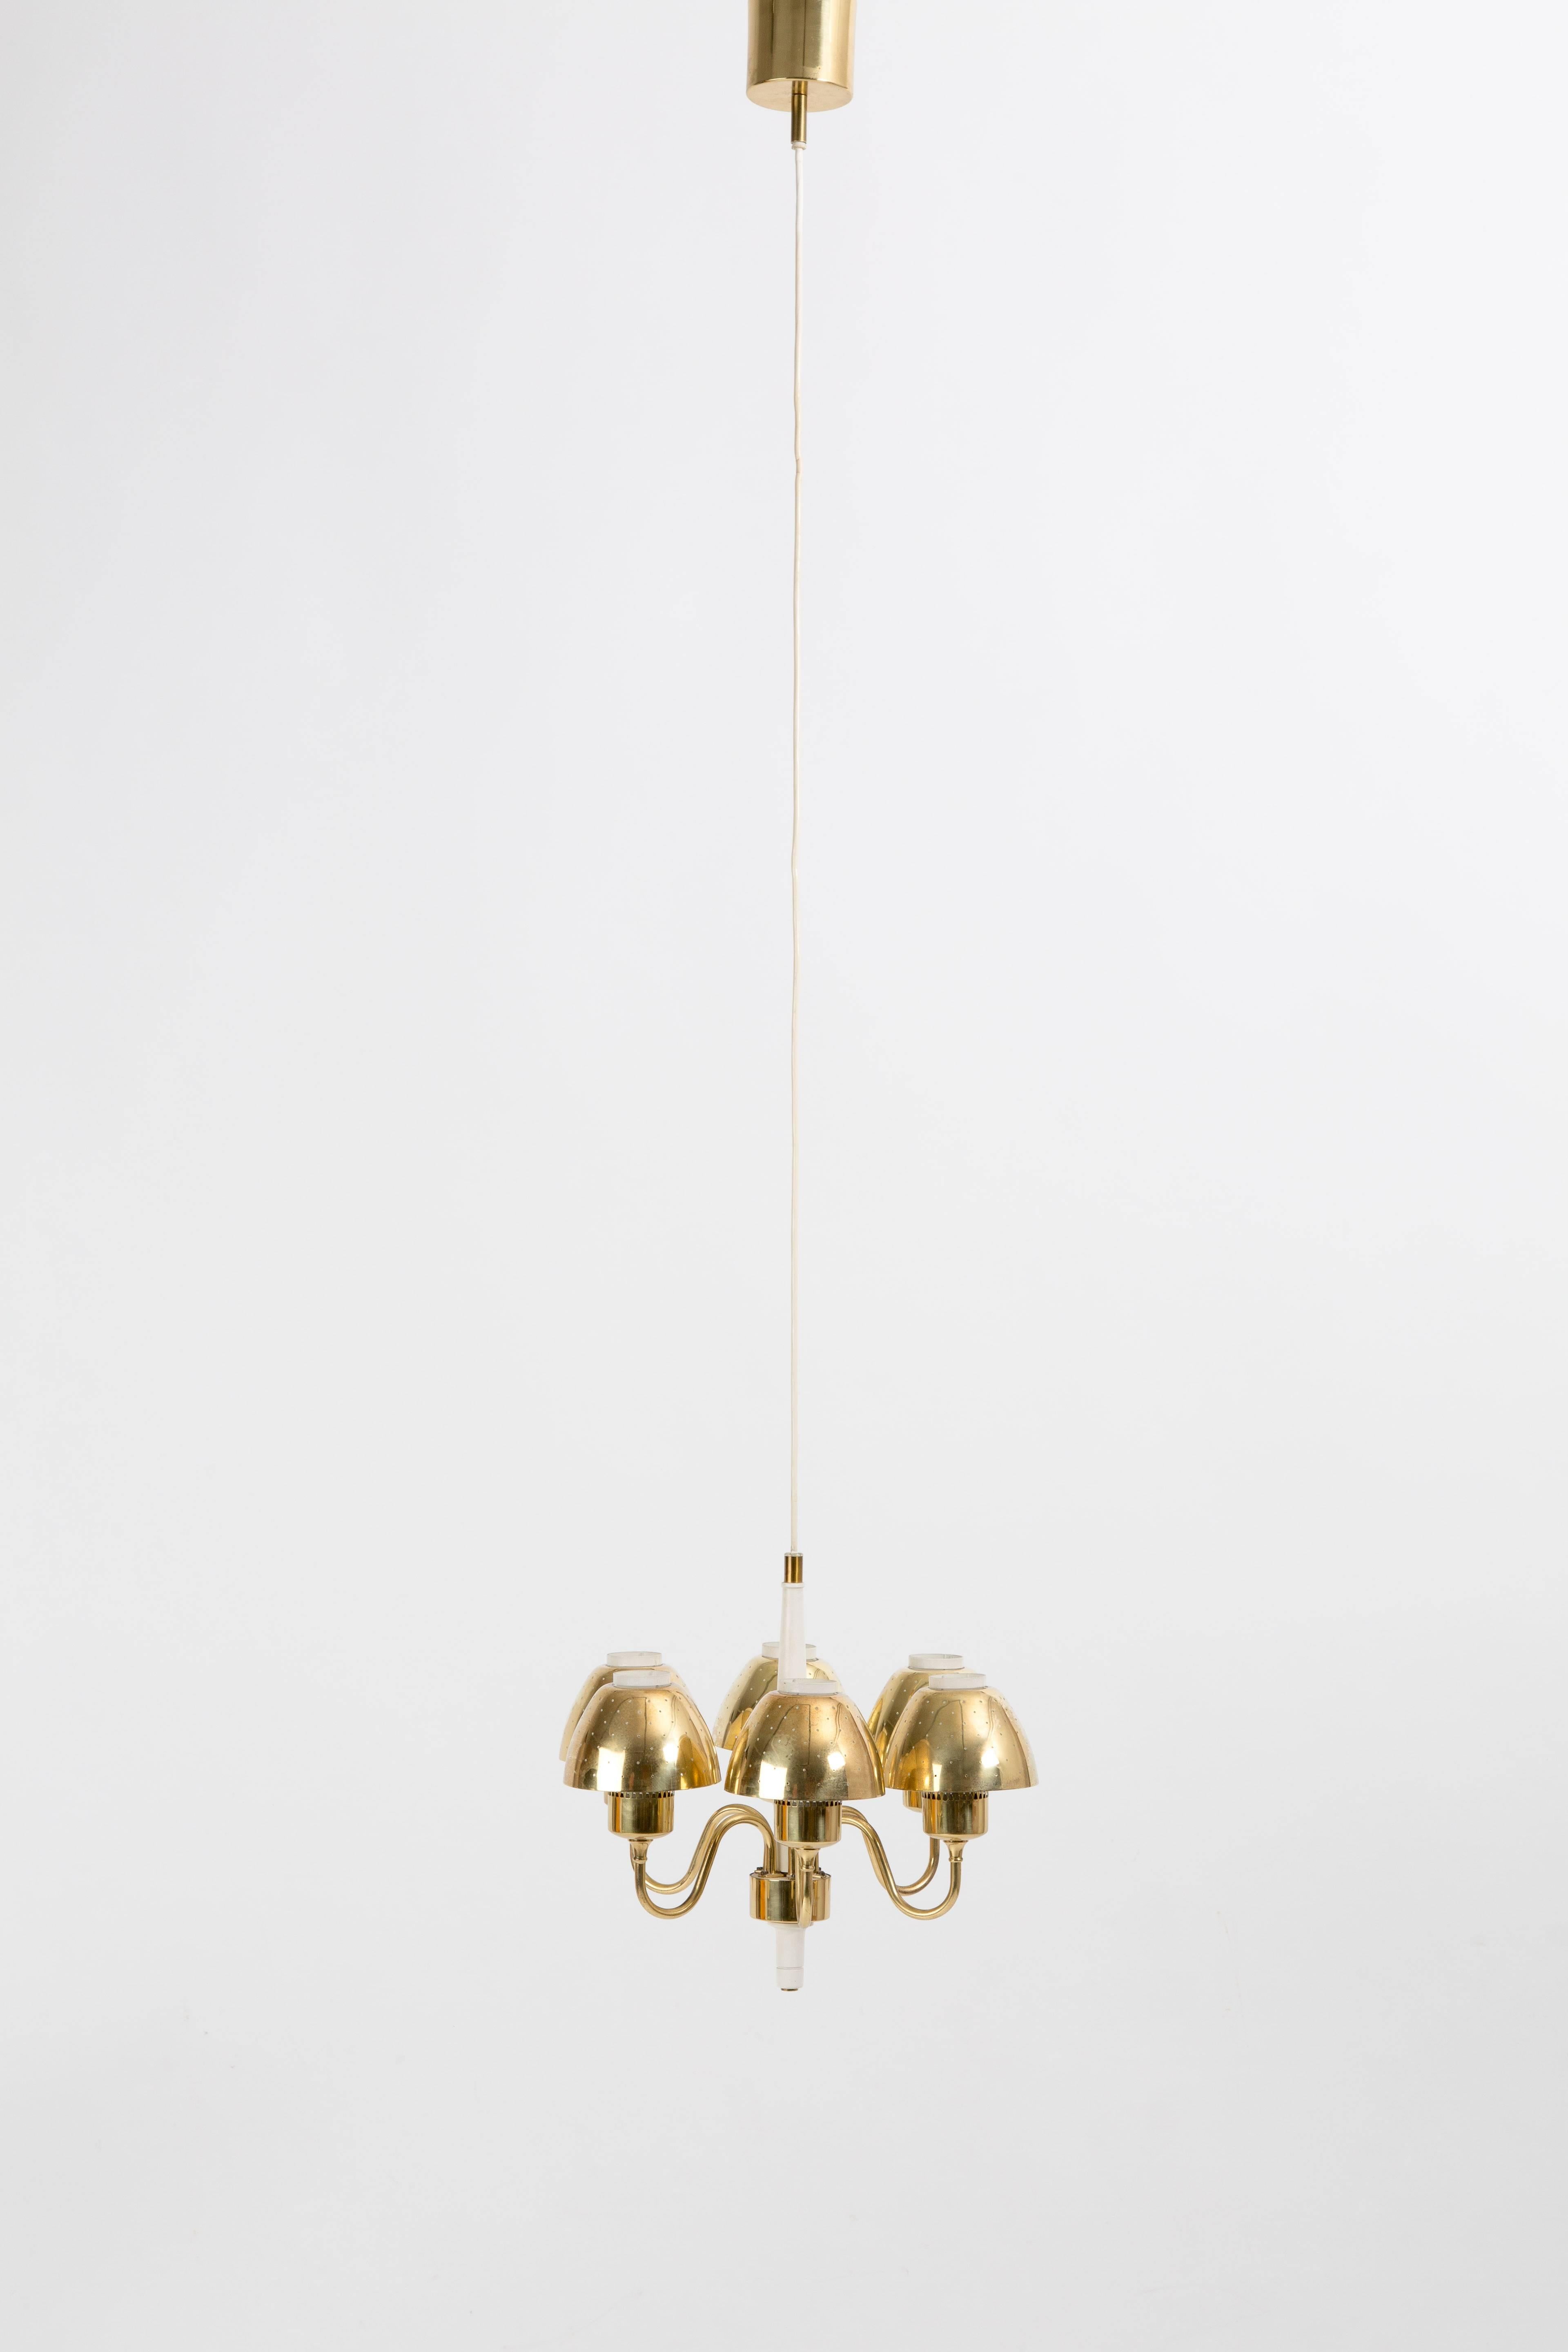 HANS AGNE JAKOBSSON brass pendant with six brass chalices 1